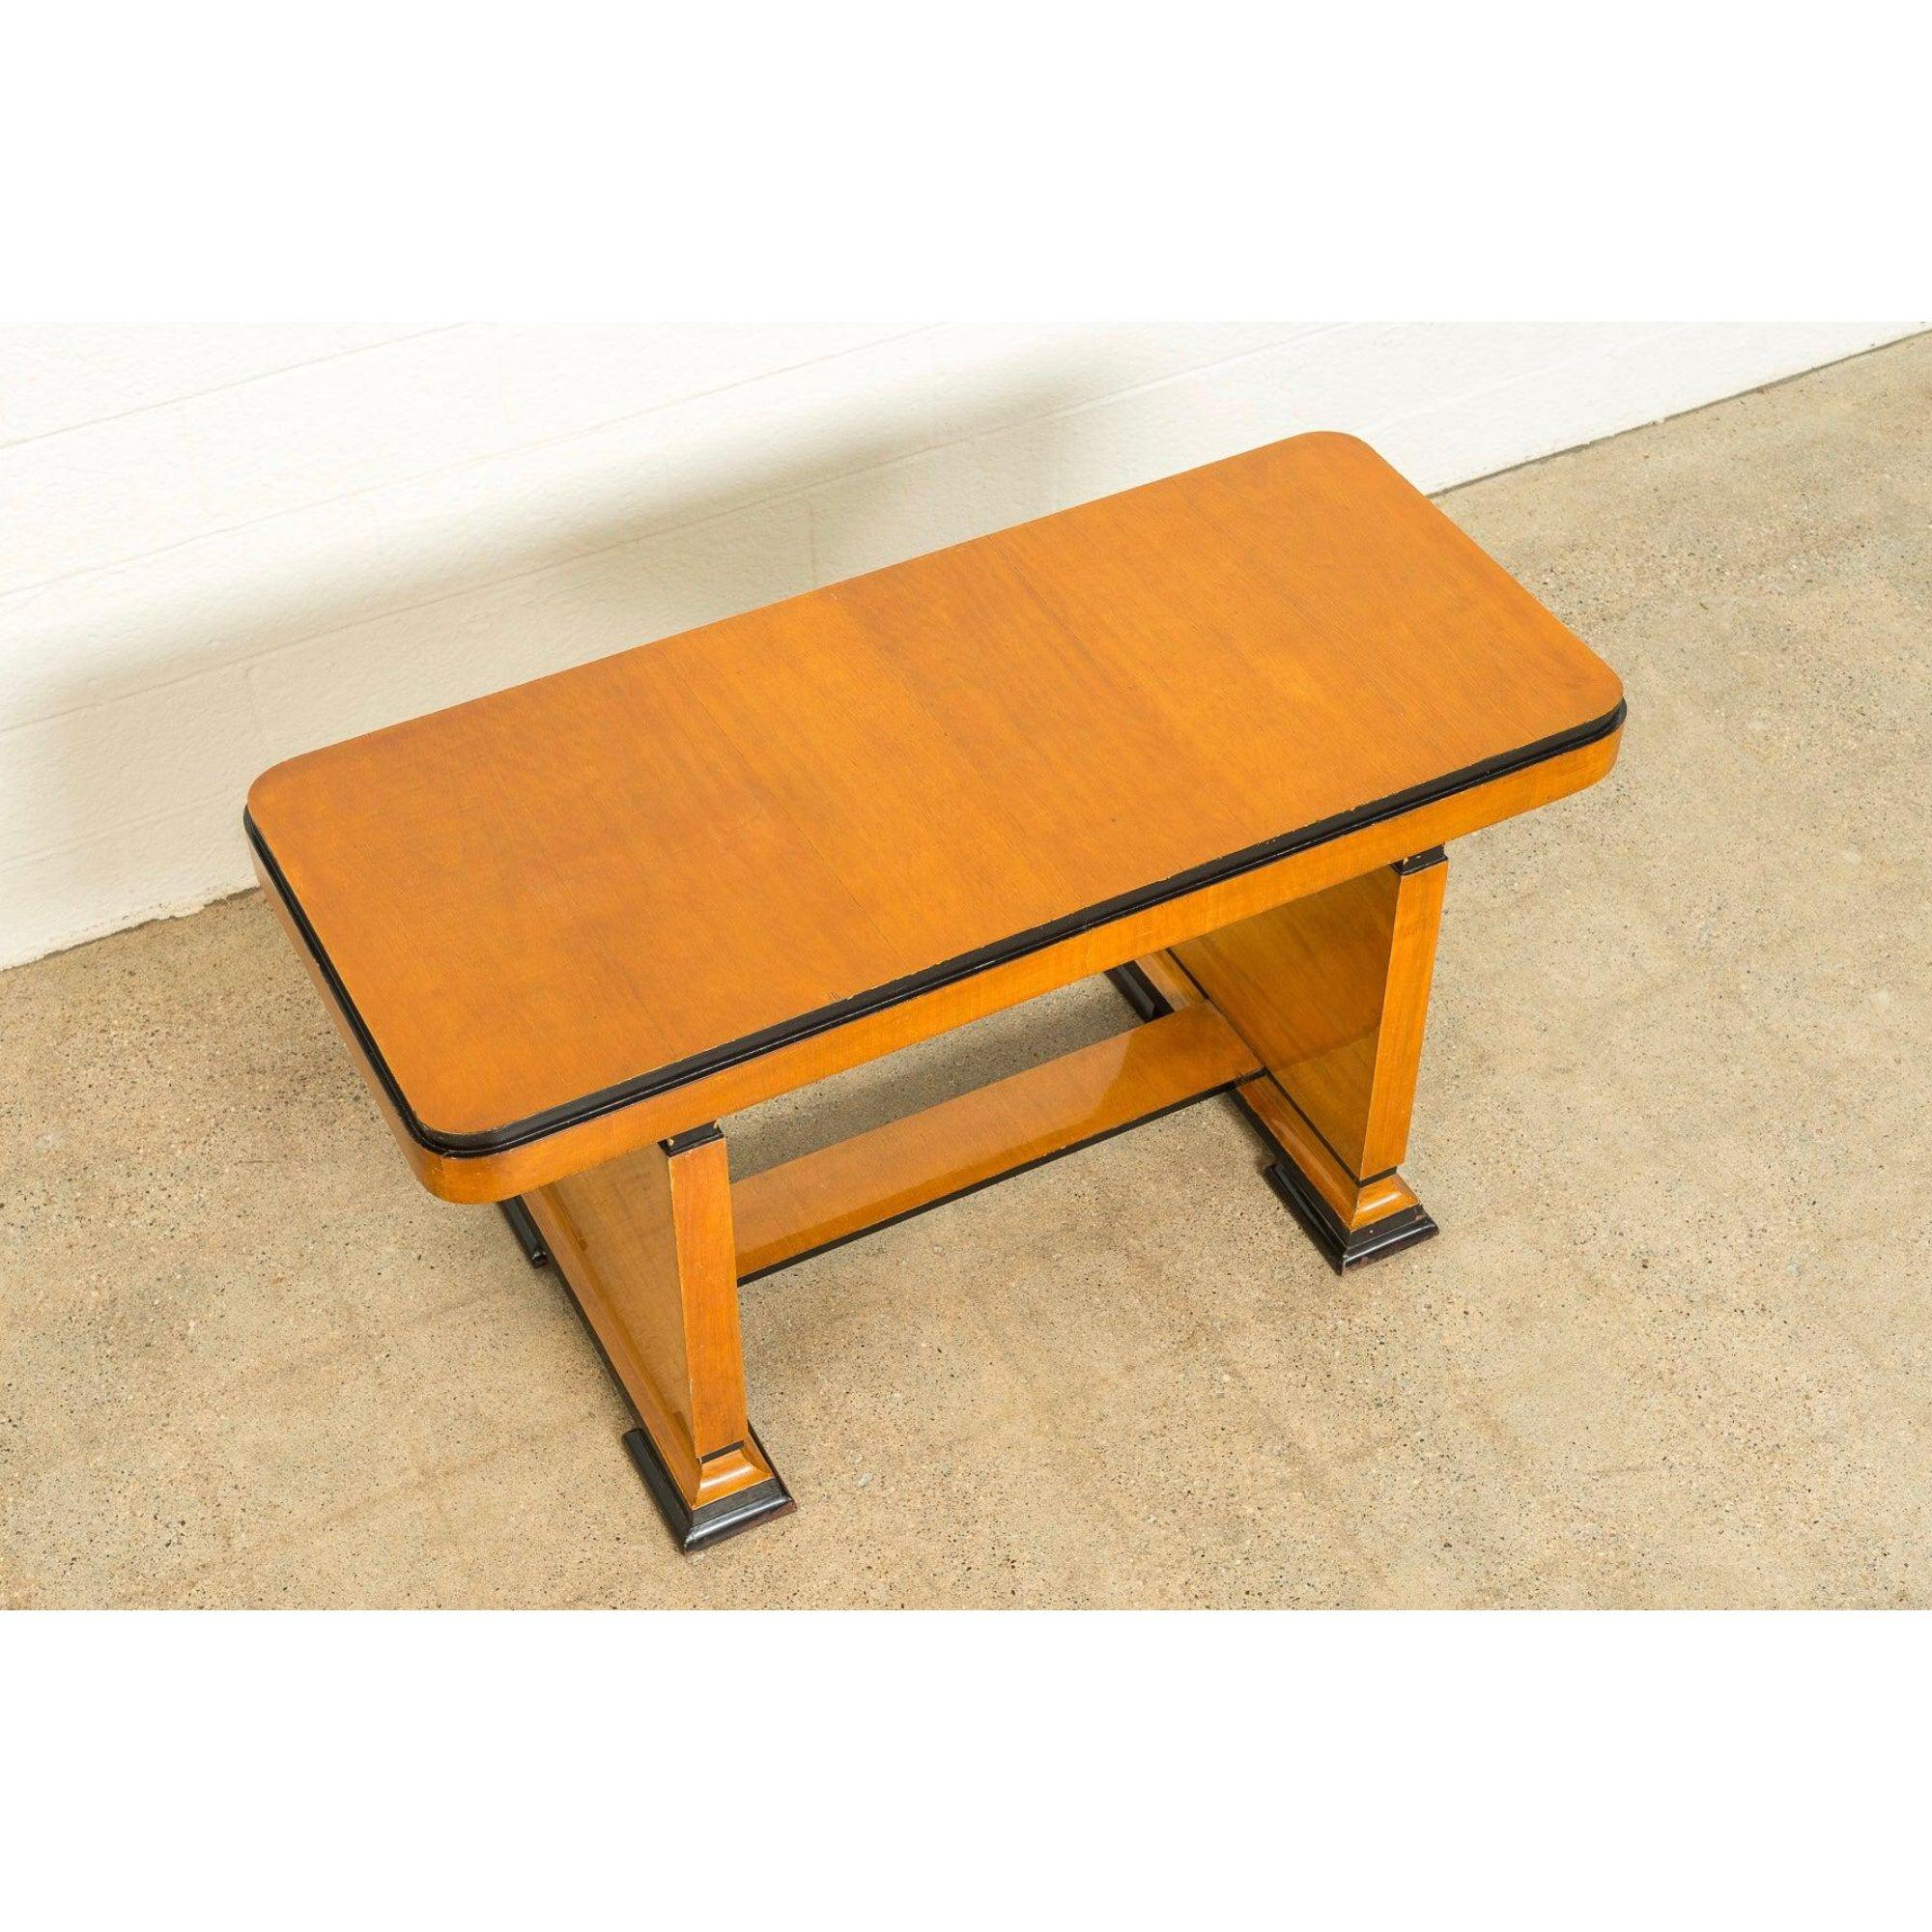 Art Deco Table or Writing Desk in Maple Wood with Ebonized Accents, circa 1930 For Sale 1